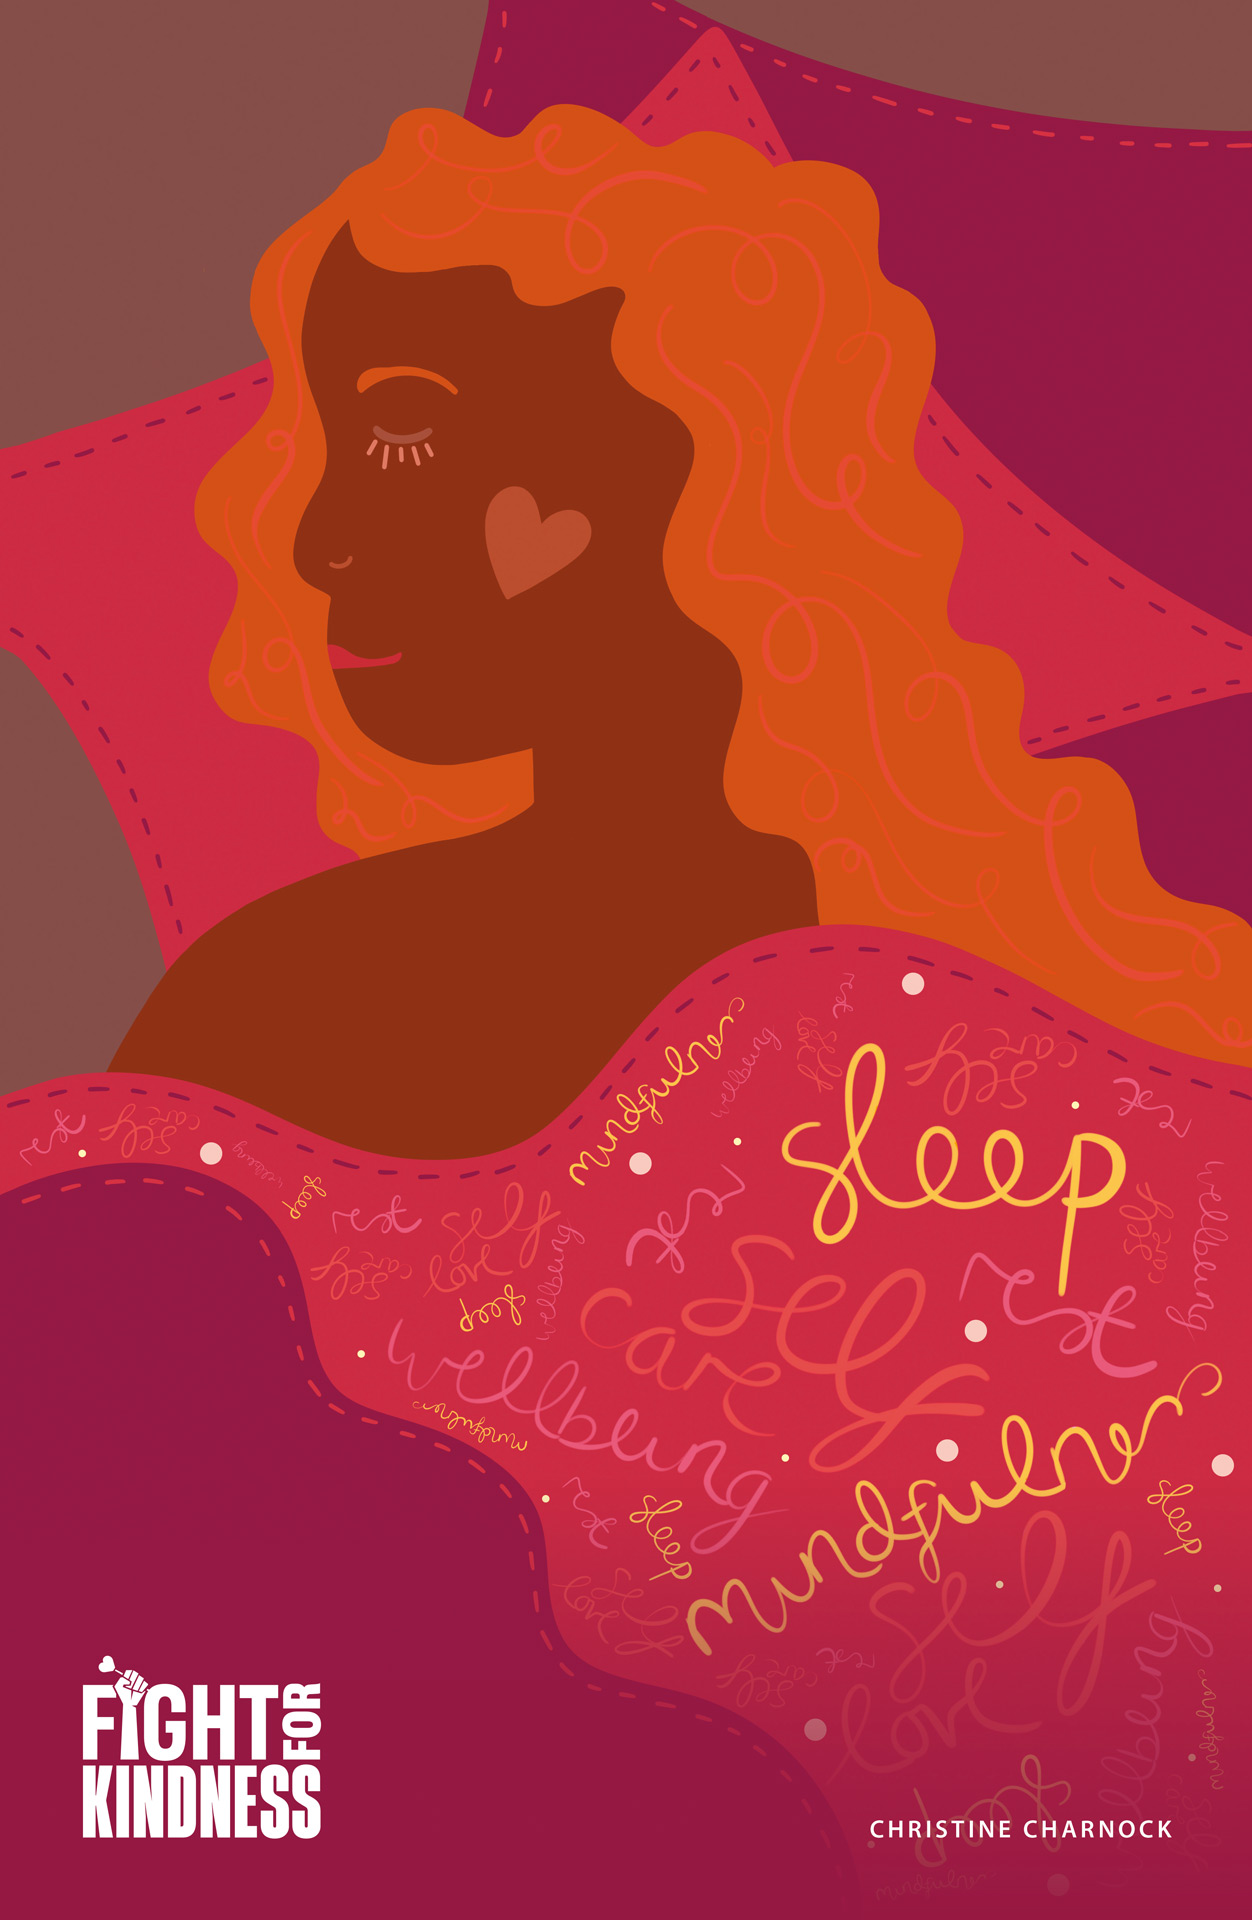 Vector-style illustration depicting a woman in bed. The duvet cover includes hand-drawn lettering with words such as ‘sleep’, ‘self care’, ‘wellbeing’, ‘sleep’, and ‘mindfulness’. The colours used are vibrant and warm, including shades of pink, purple, orange and yellow.